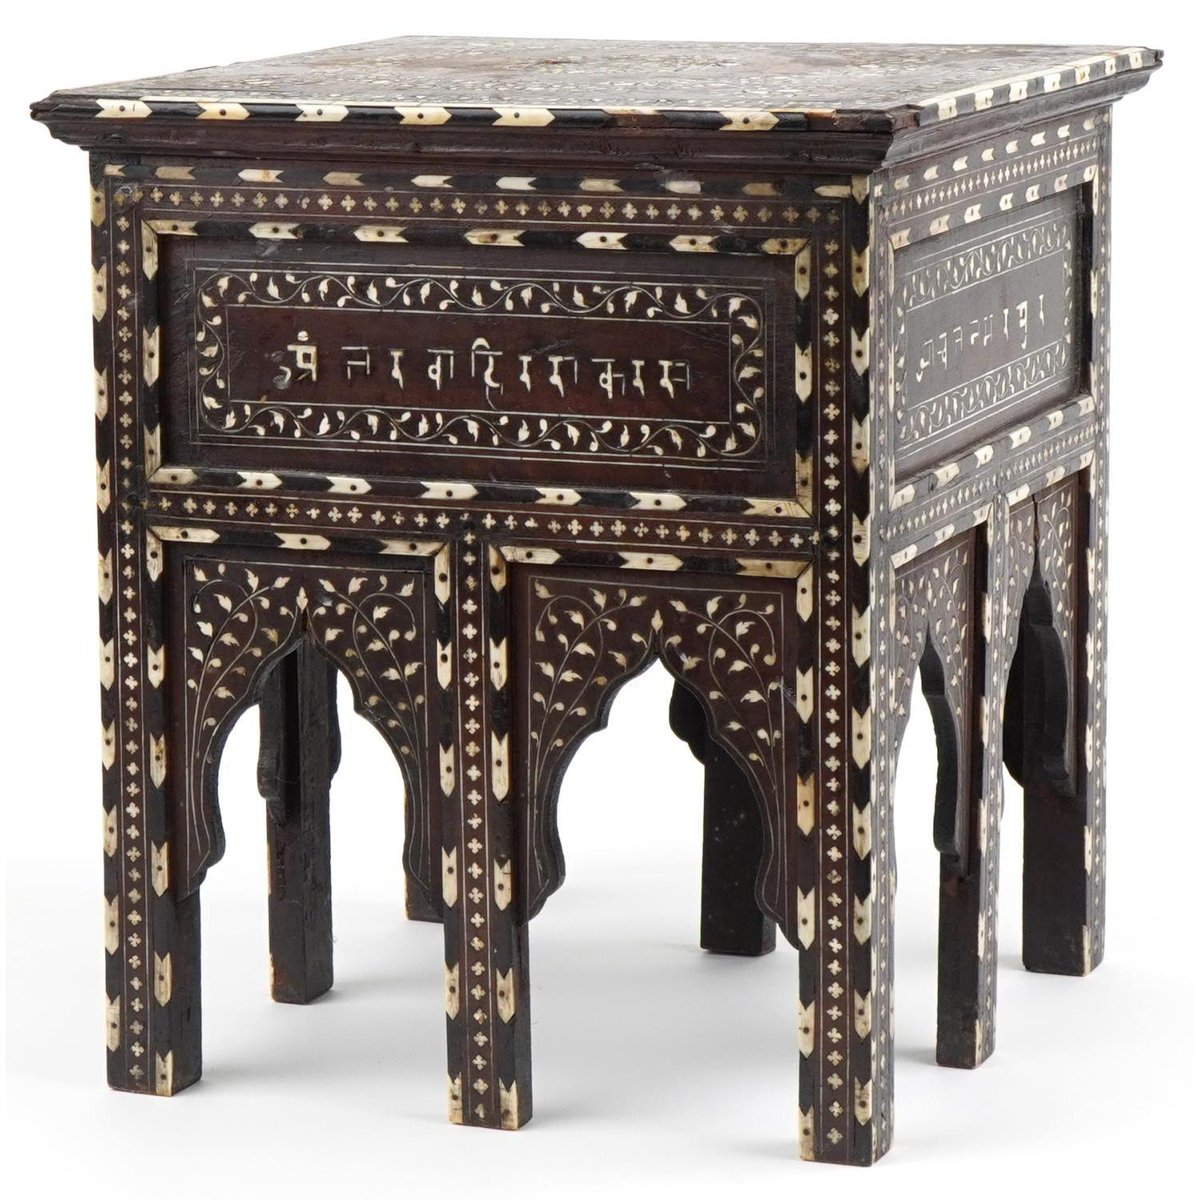 Day Three of our Antiques, Collectables, and Jewellery Auction is going strong!

Lot 2051 is a Moorish Syrian hardwood occasional table.

Catch the auction here: bit.ly/3GQV2Rc

#eastbourneauctions #Moorishfurniture #Syrianhardwood #occasionaltable